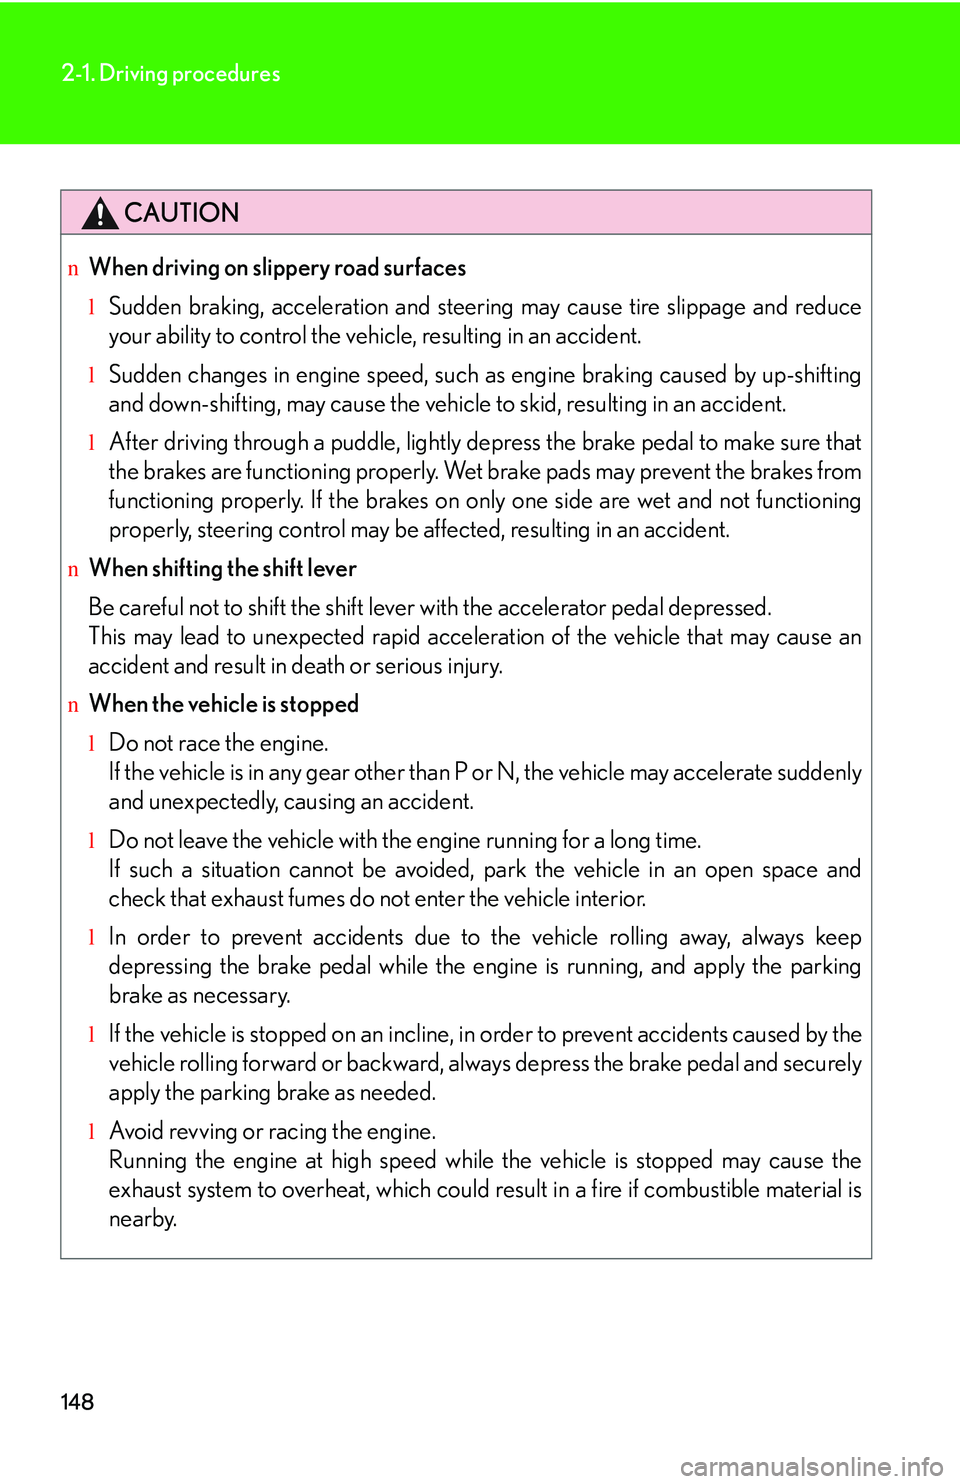 LEXUS RX350 2011  Owners Manual 148
2-1. Driving procedures
CAUTION
nWhen driving on slippery road surfaces
lSudden braking, acceleration and steering may cause tire slippage and reduce
your ability to control the vehicle, resulting